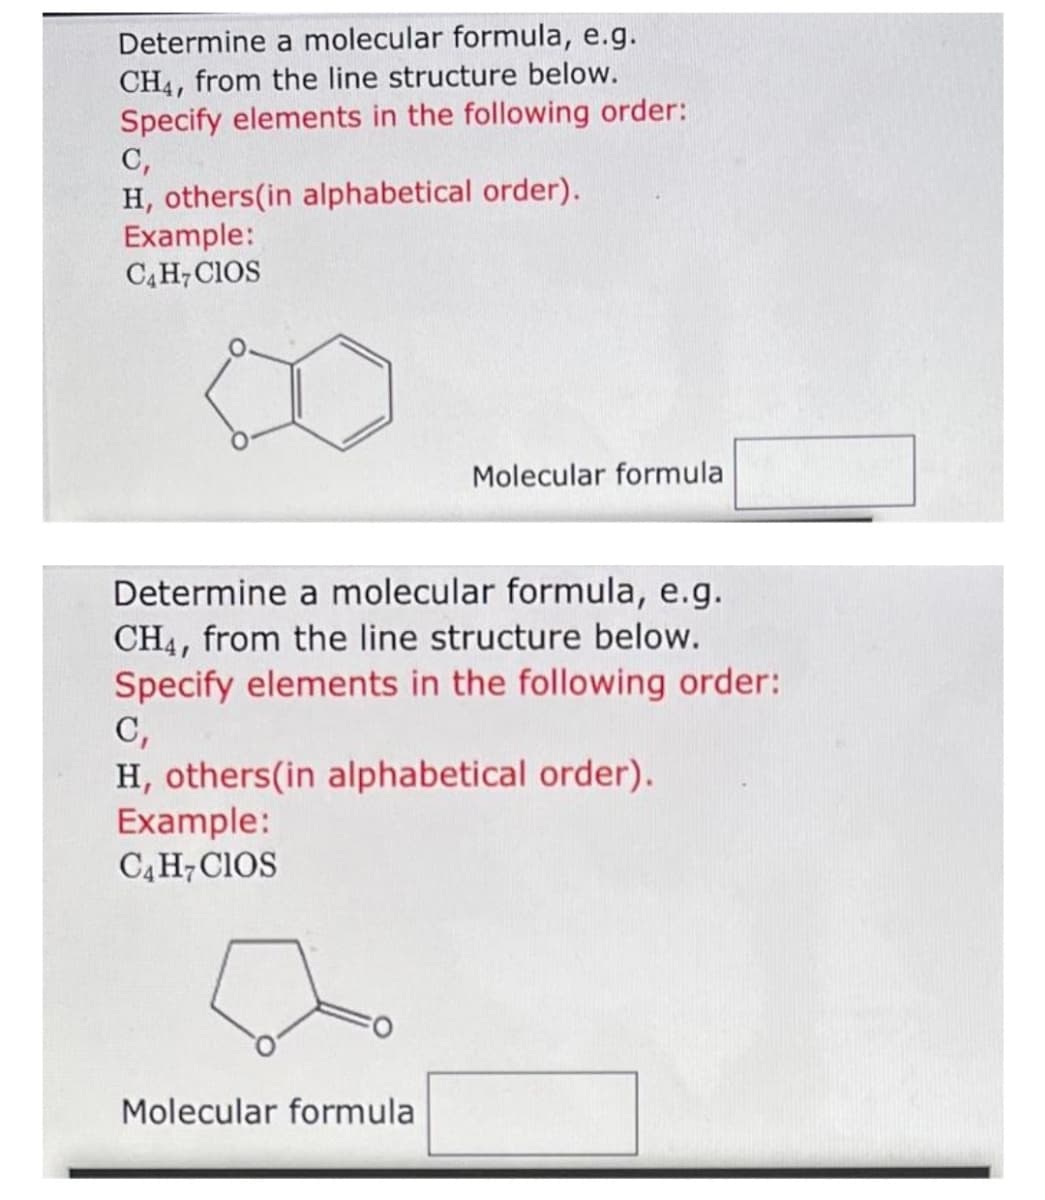 Determine a molecular formula, e.g.
CH4, from the line structure below.
Specify elements in the following order:
C,
H, others(in alphabetical order).
Example:
C4H7CIOS
Determine a molecular formula, e.g.
CH4, from the line structure below.
Specify elements in the following order:
C,
H, others(in alphabetical order).
Example:
C4 H7 CIOS
Molecular formula
Molecular formula